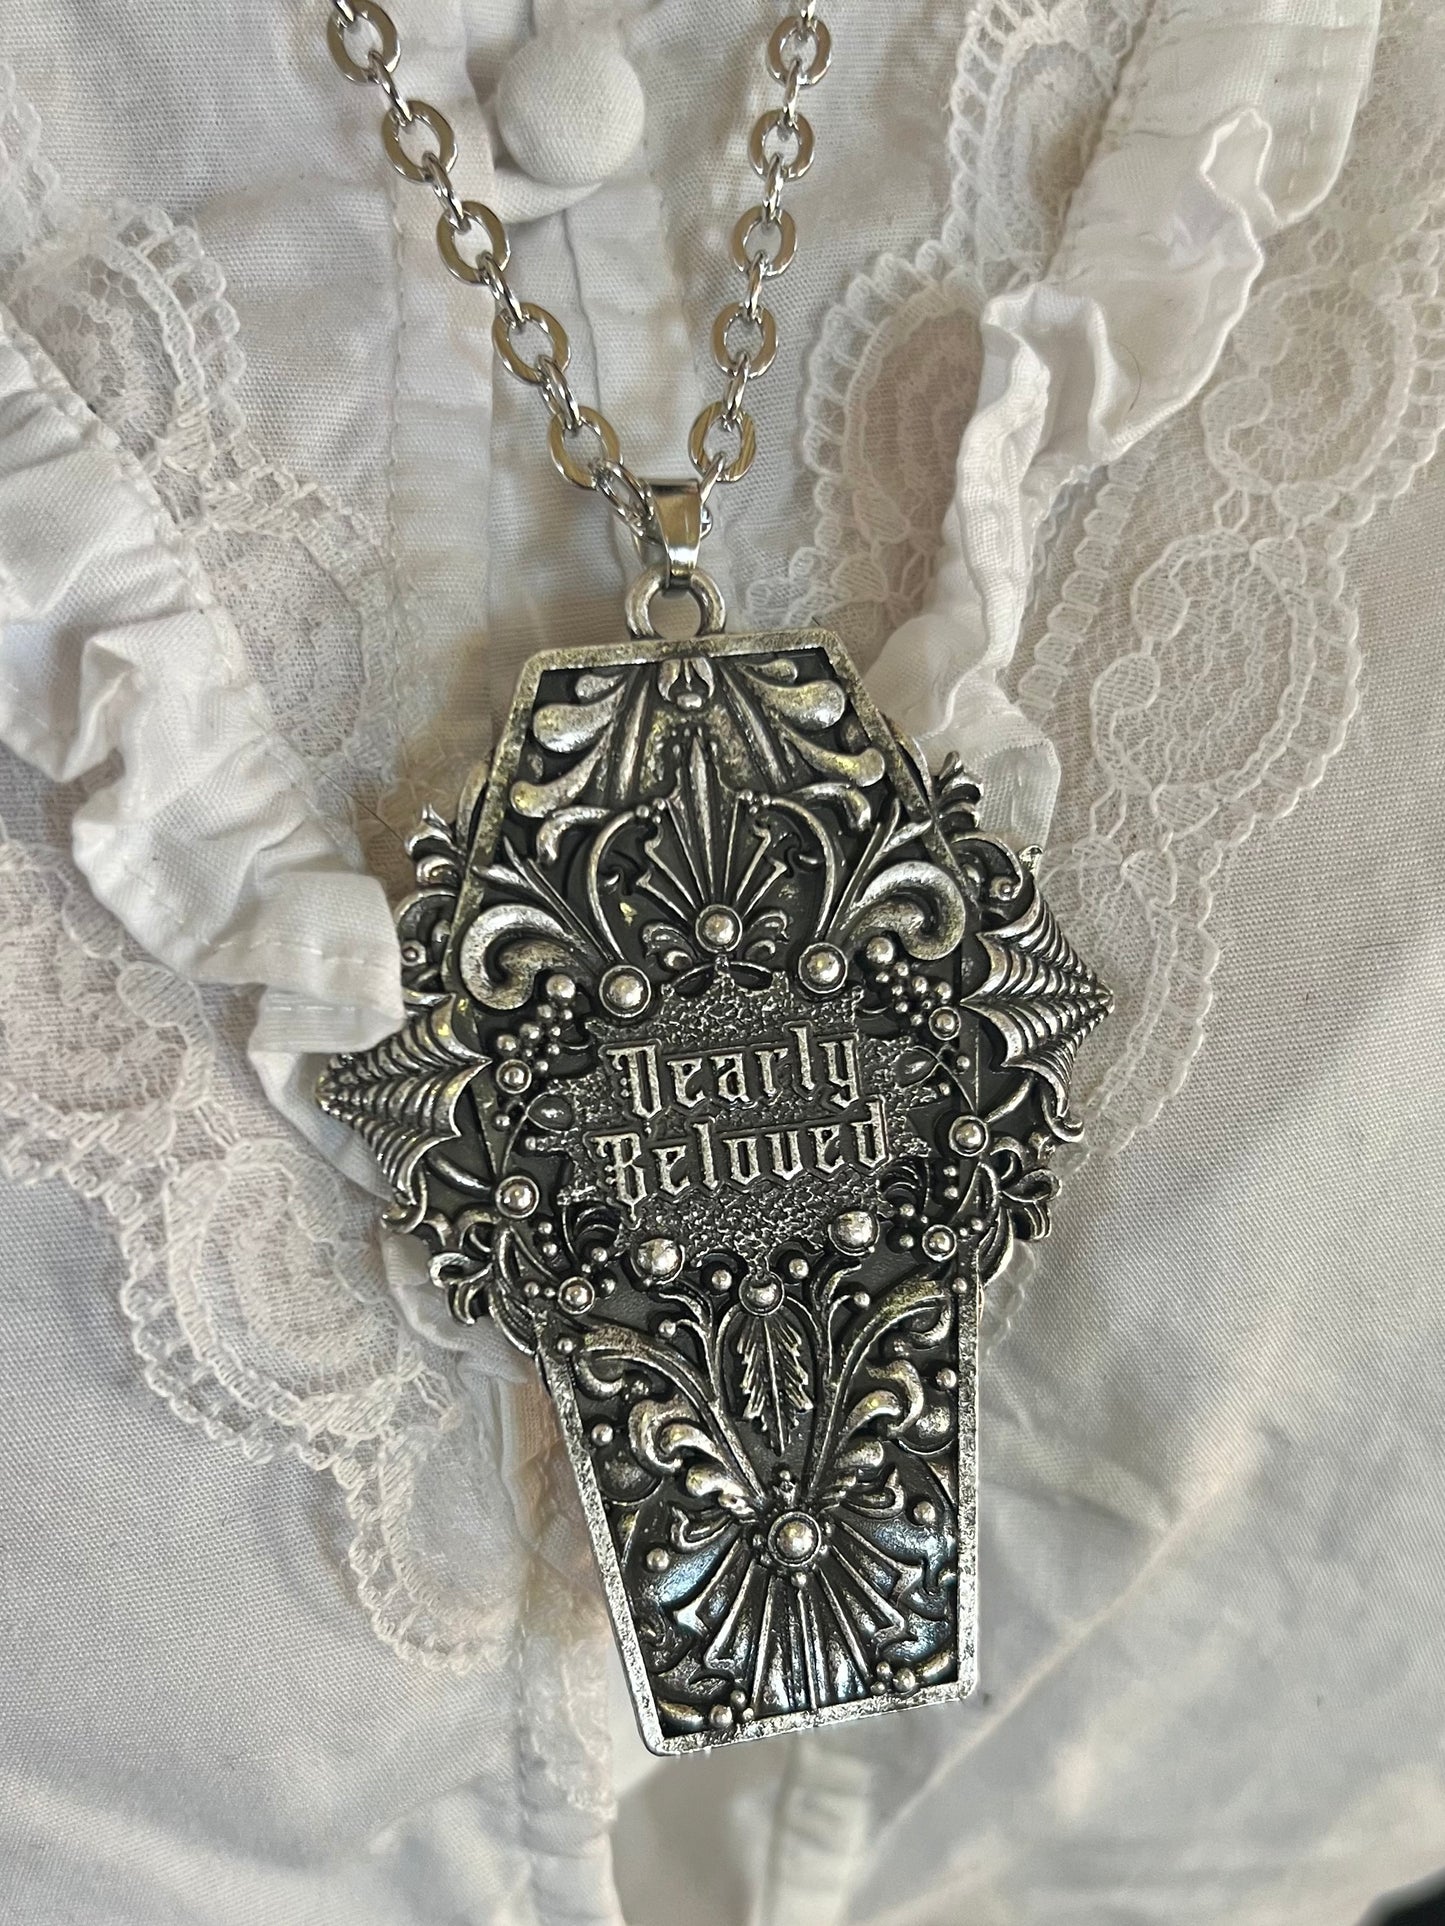 DEARLY BELOVED  - Mother of Hades Cast Coffin Necklace